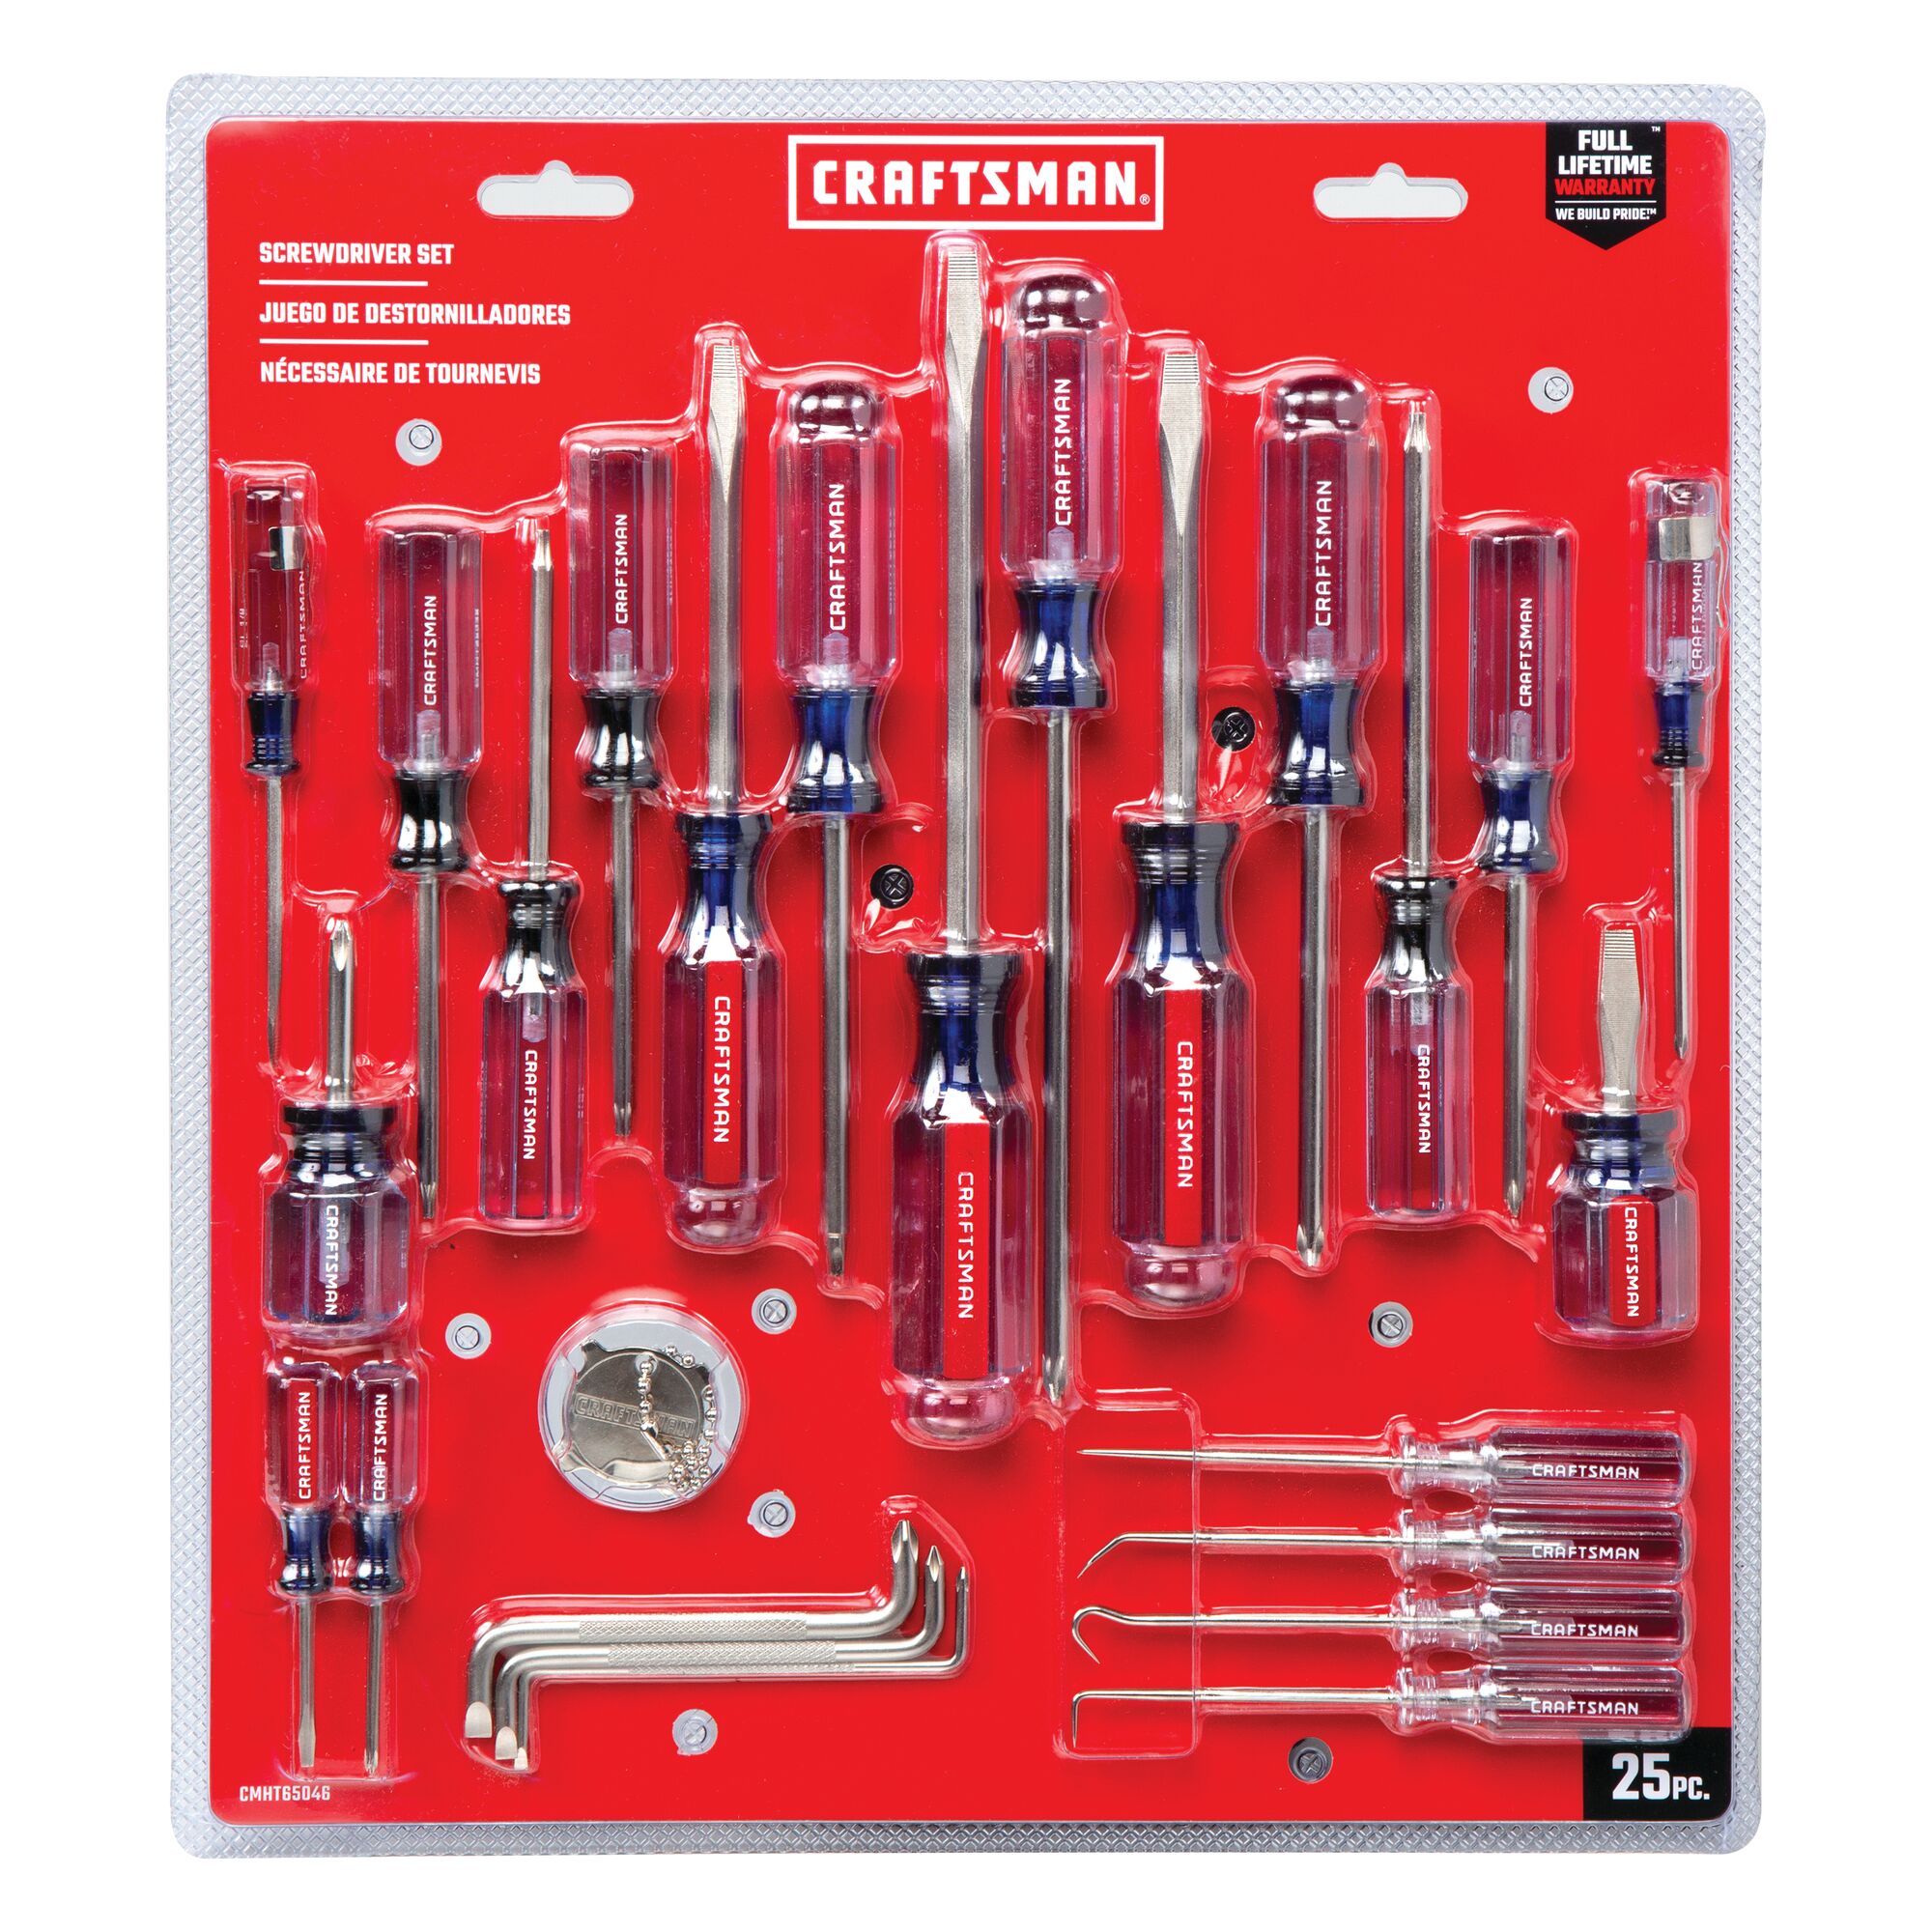 25 piece Acetate ScrewDriver Set in carded blister packaging.